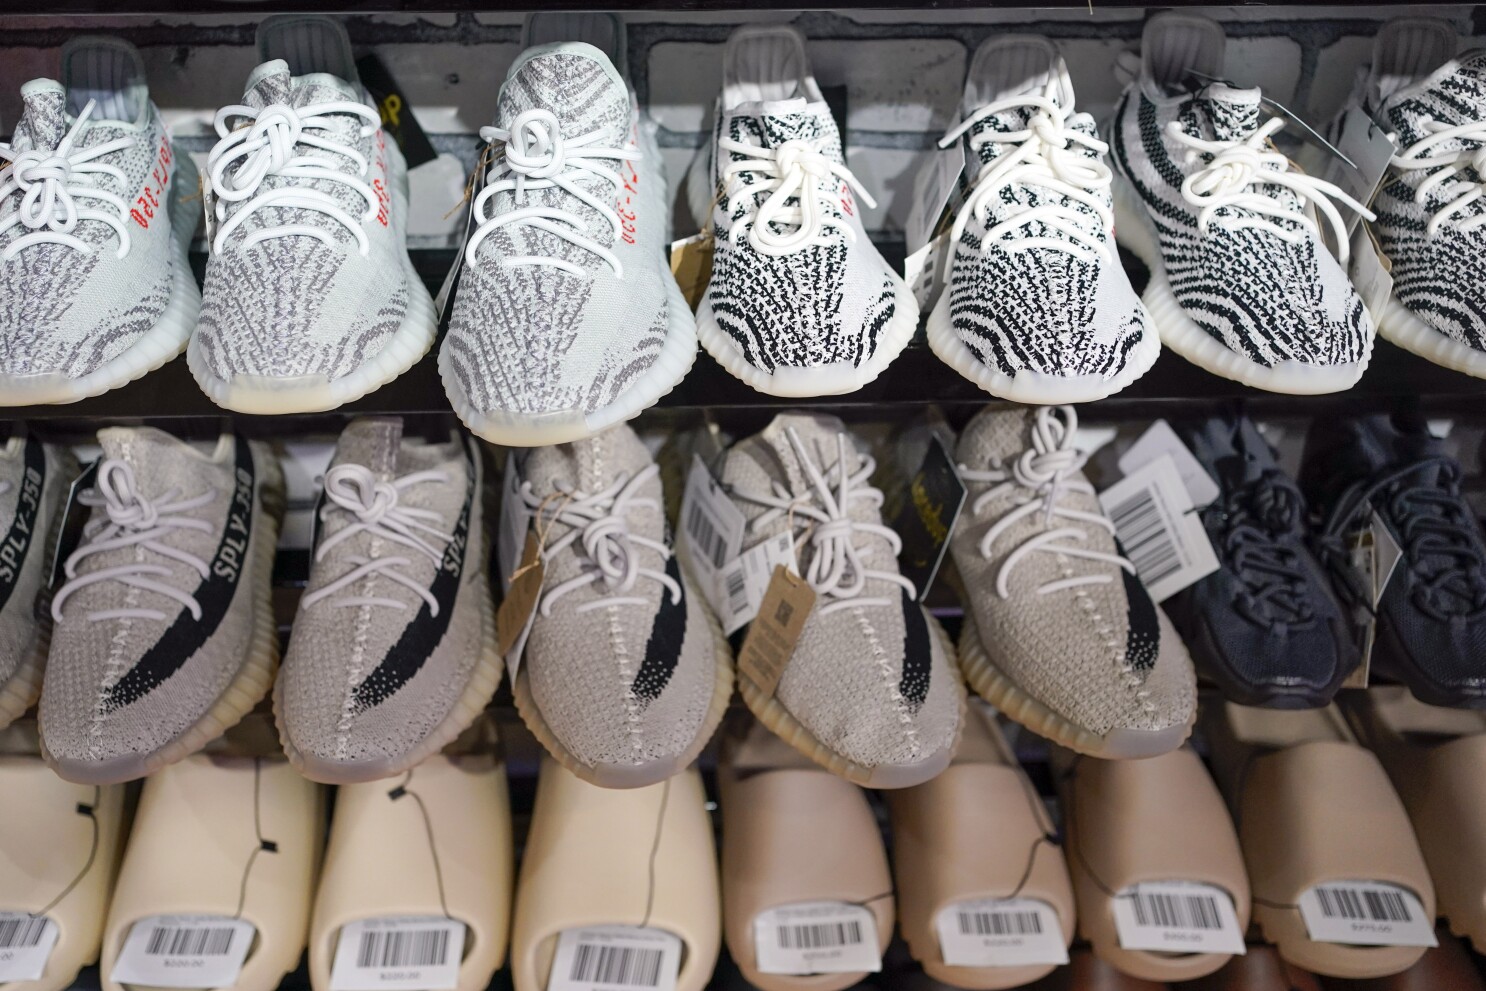 Adidas to release second of Yeezy sneakers after breakup with Ye | AP News